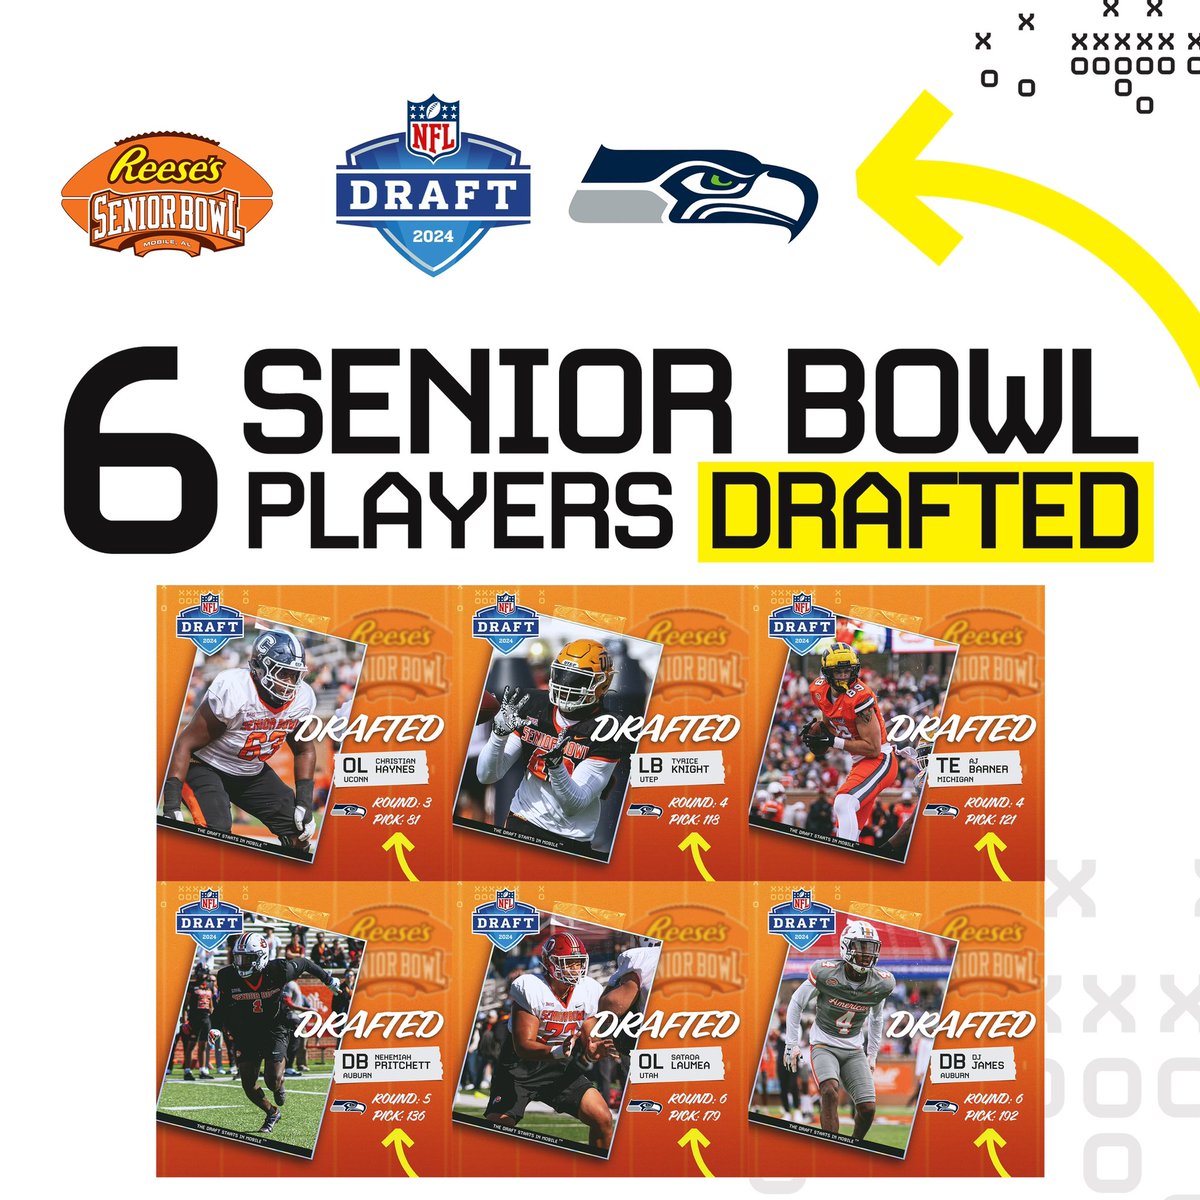 Here's what #Seahawks fans can expect from @seniorbowl draft picks: 🔹 G/C Christian Haynes (Round 3, Pick 81)- One of top-two IOL zone scheme fits in 2024 class (w/ Duke's G. Barton) should plug in as immediate solid starter at RG. Durable, reliable, & NFL-ready with 49